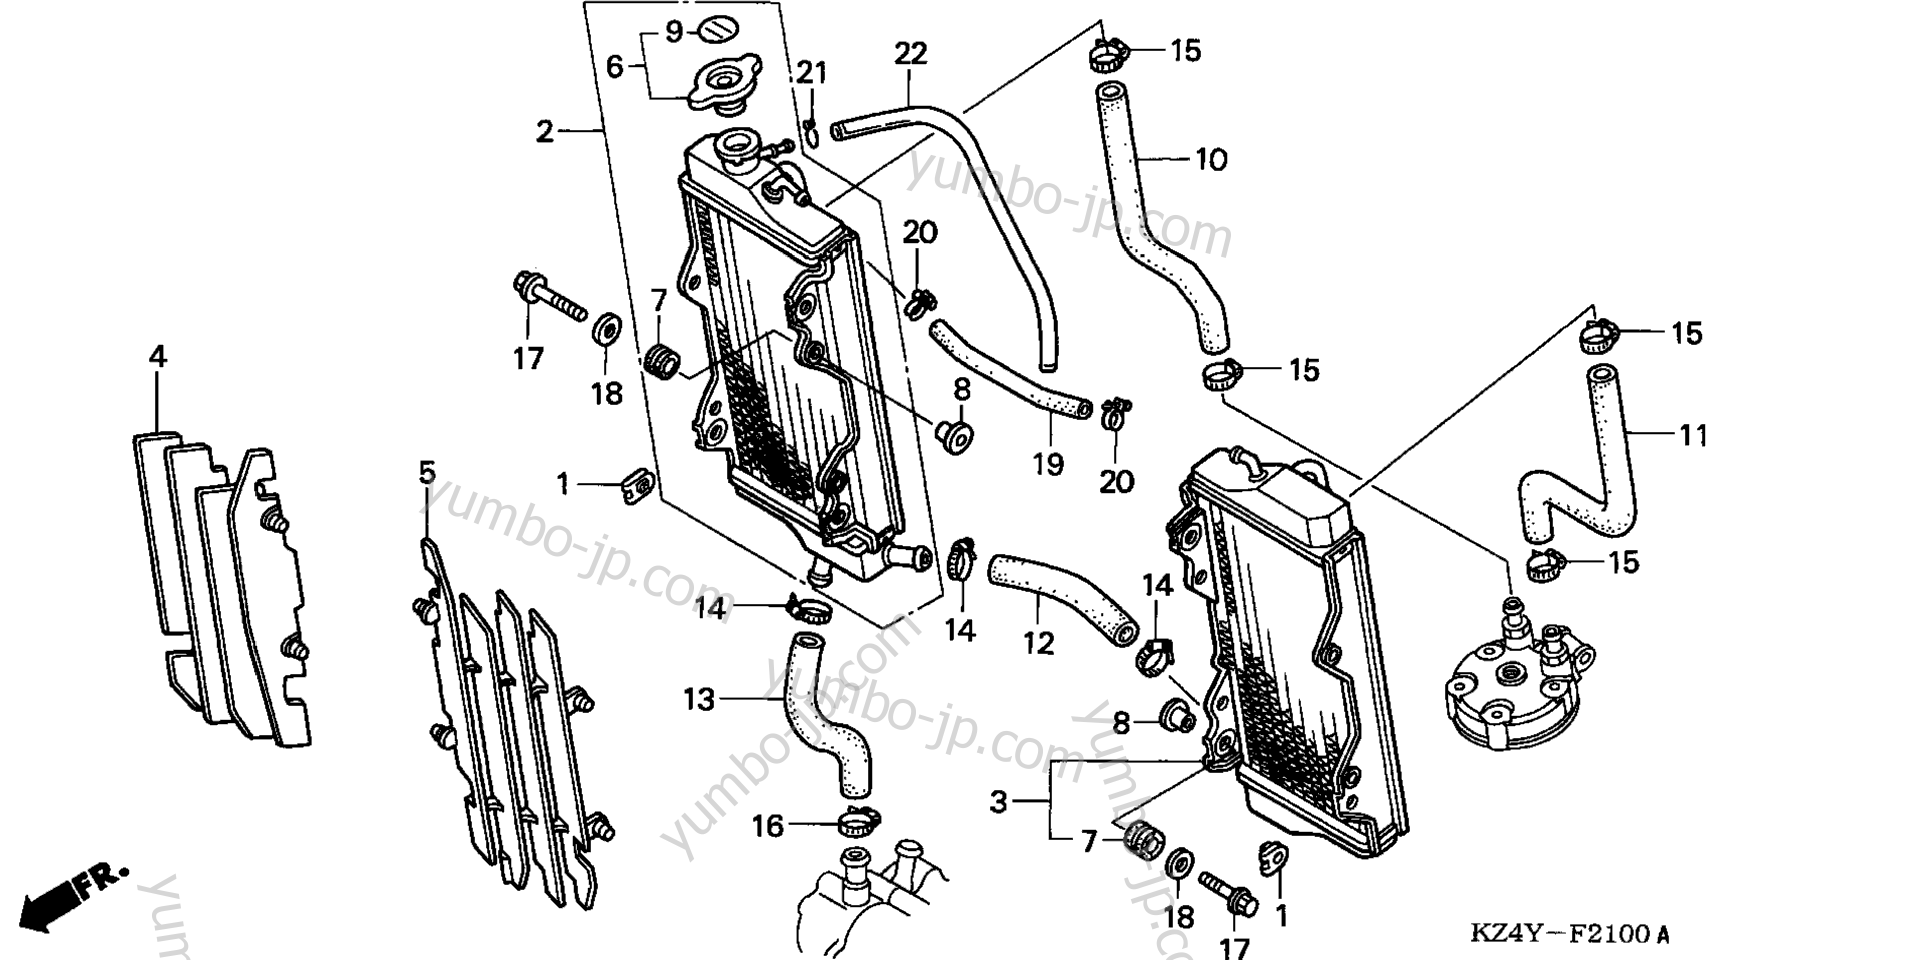 RADIATOR for motorcycles HONDA CR125R A 2000 year